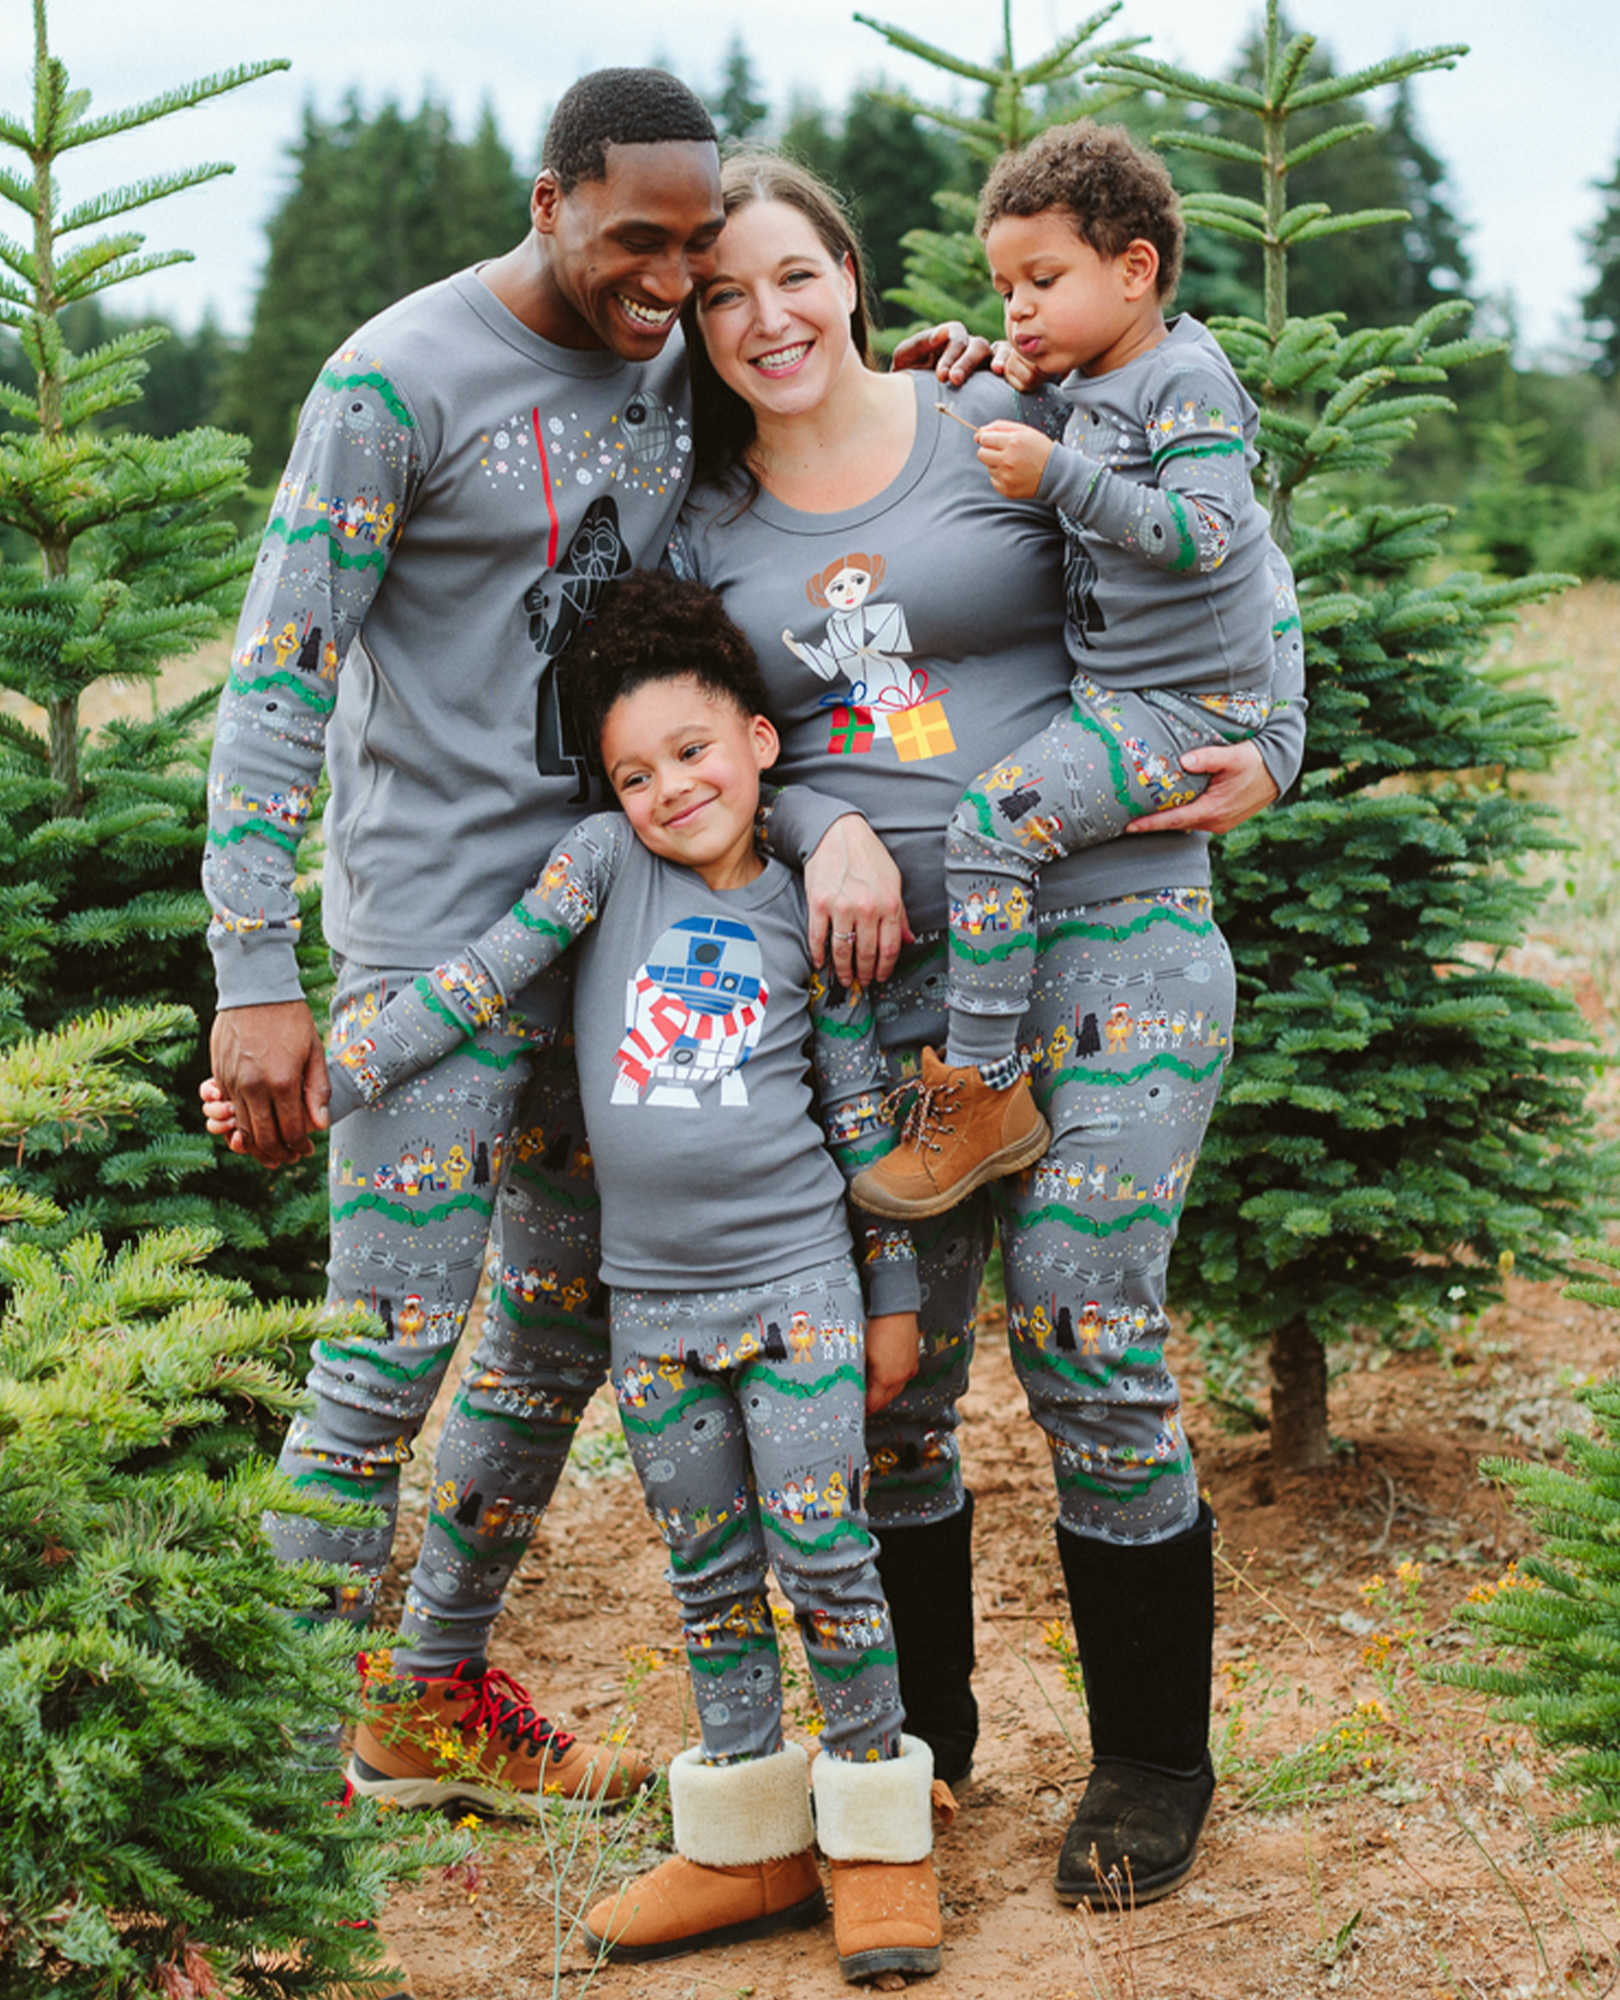 star wars carolers family match outfit